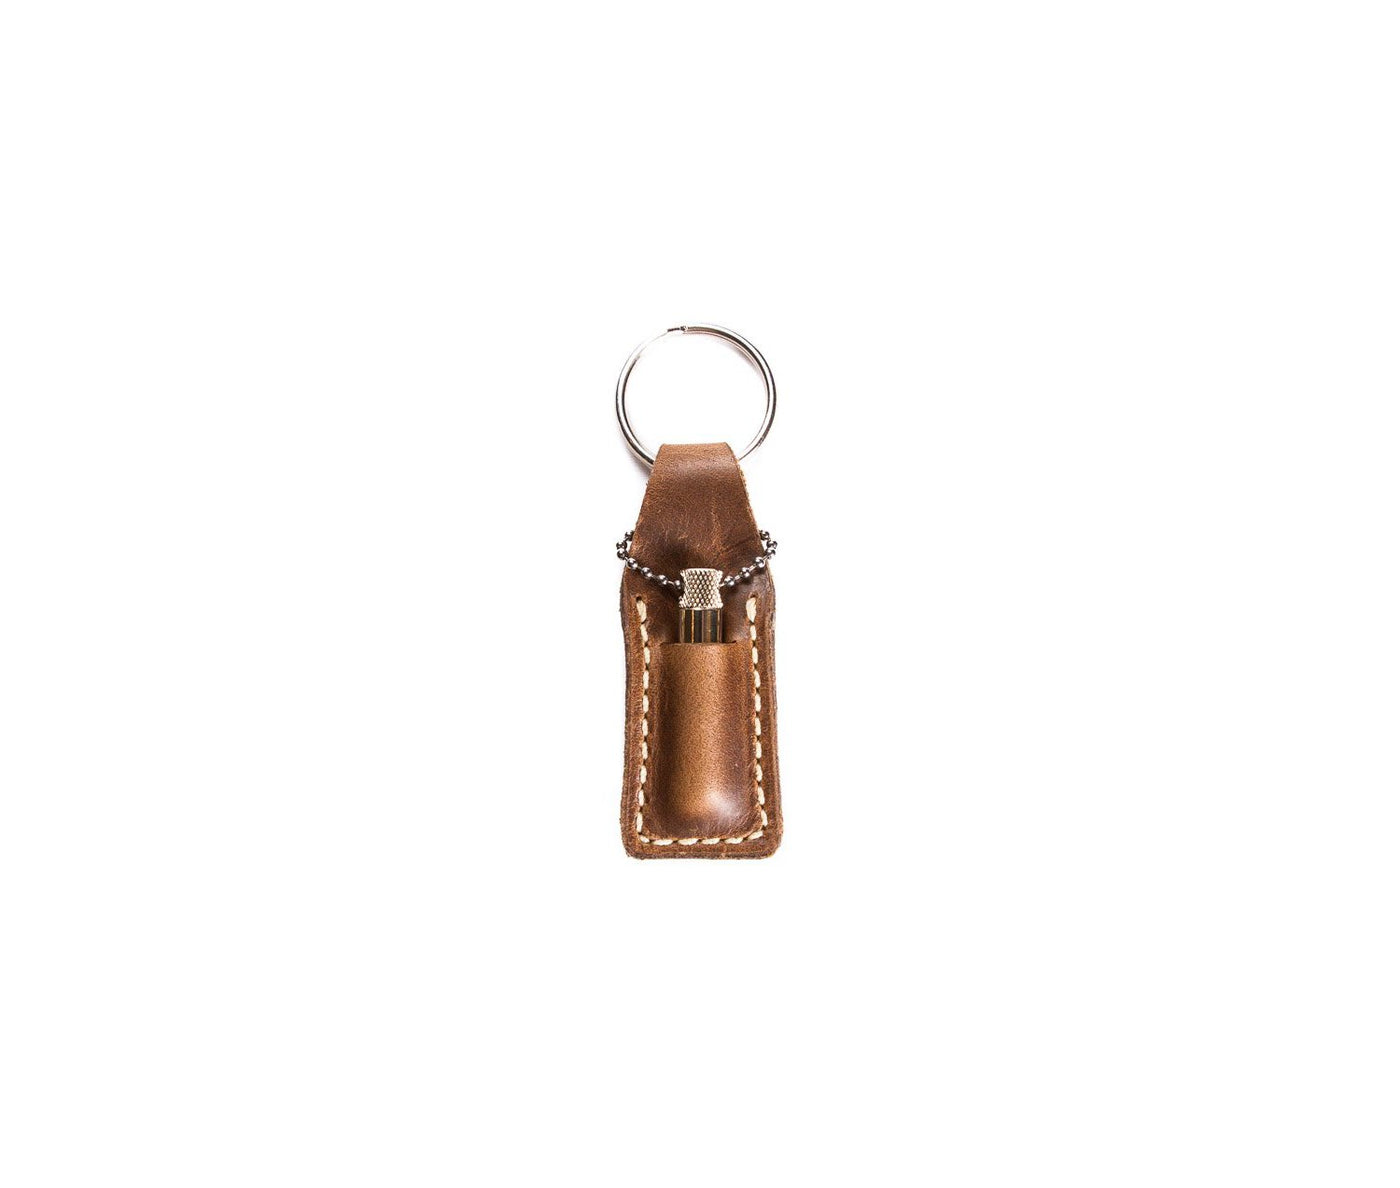 Oil Vial by Lifetime Leather Co